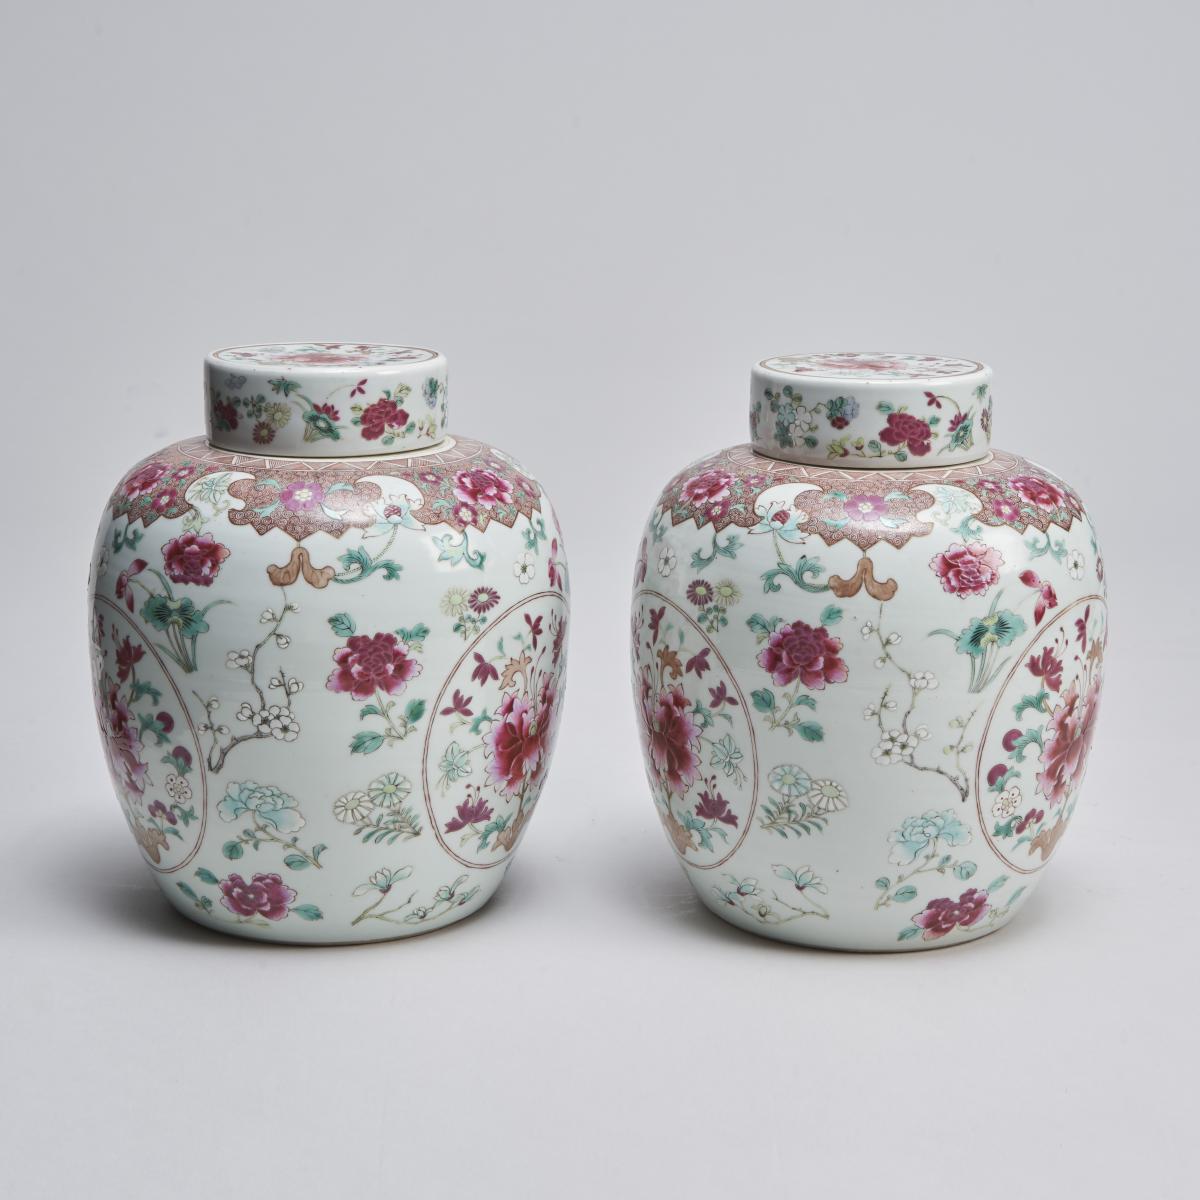 An ornate pair of 19th Century Chinese famille rose jars and covers